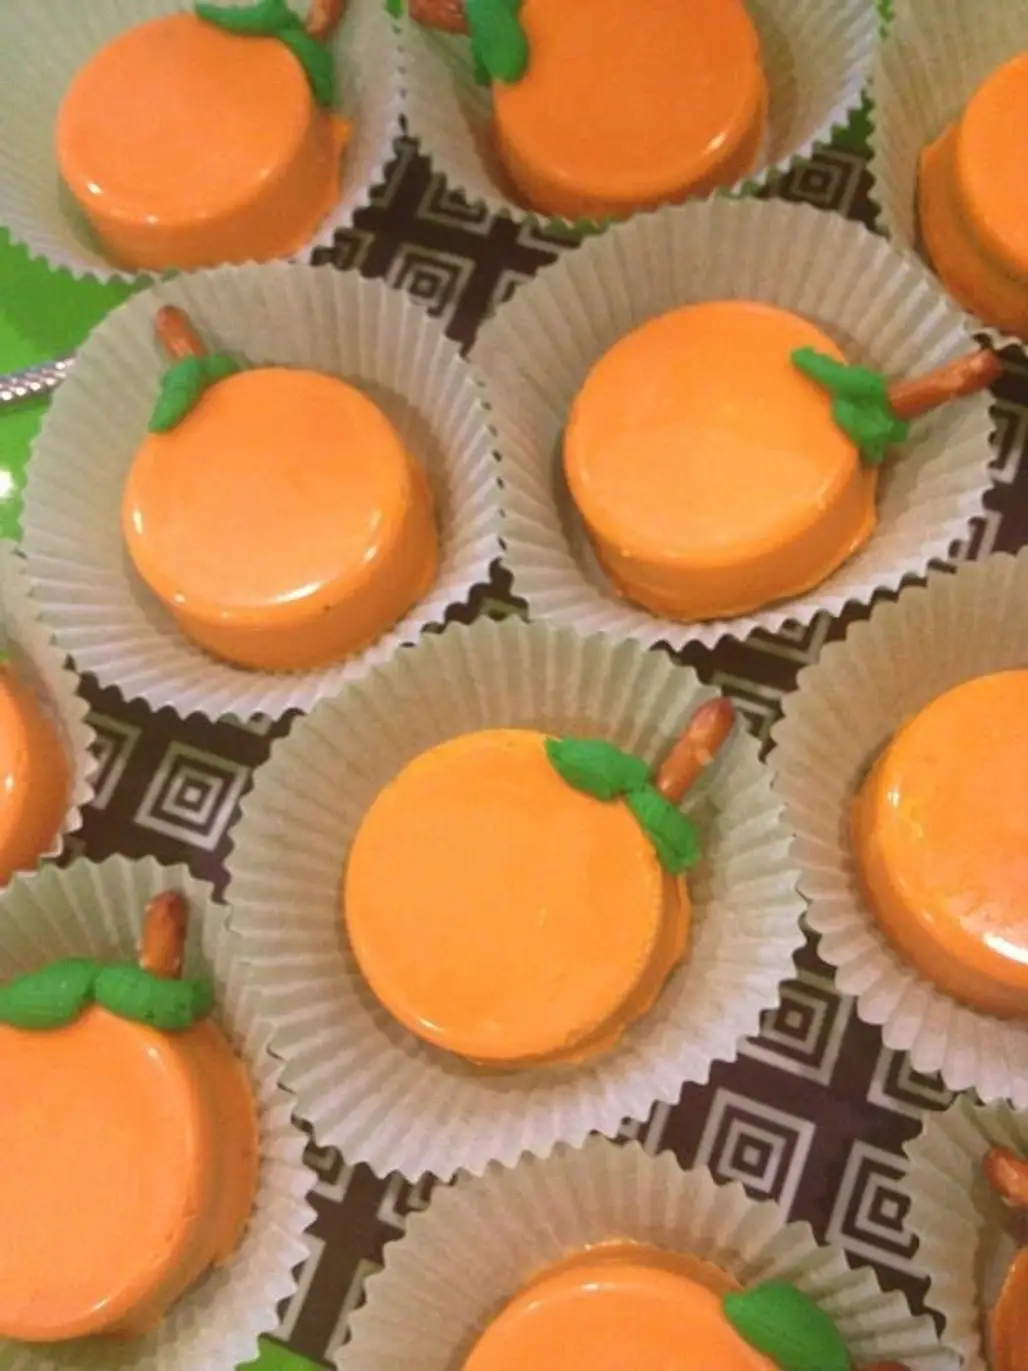 COver Them in Orange Tinted White Chocolate and Turn Them into Pumpkins